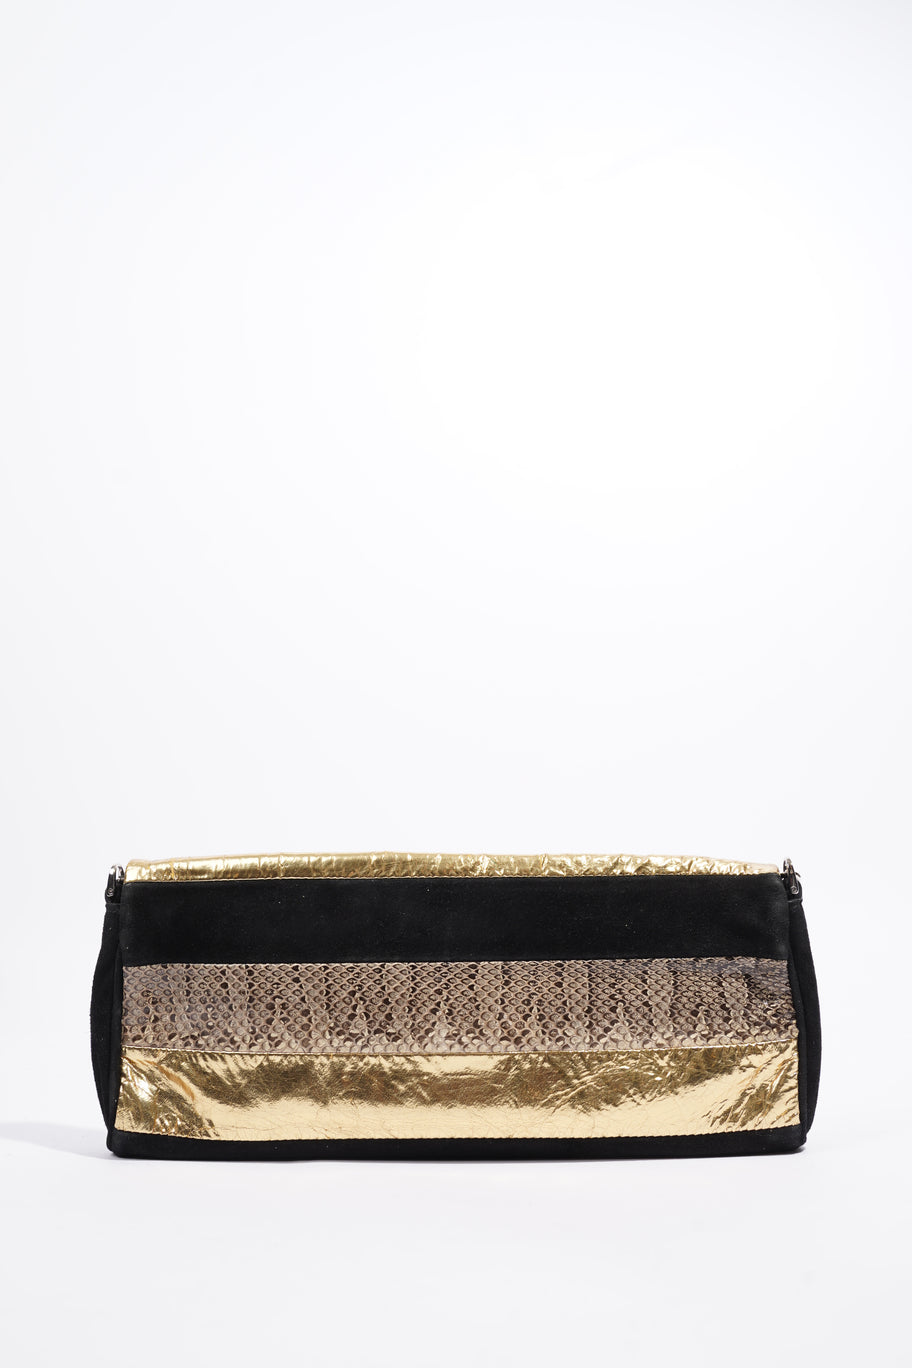 Clutch Bag With Chain Black / Gold Python Image 5